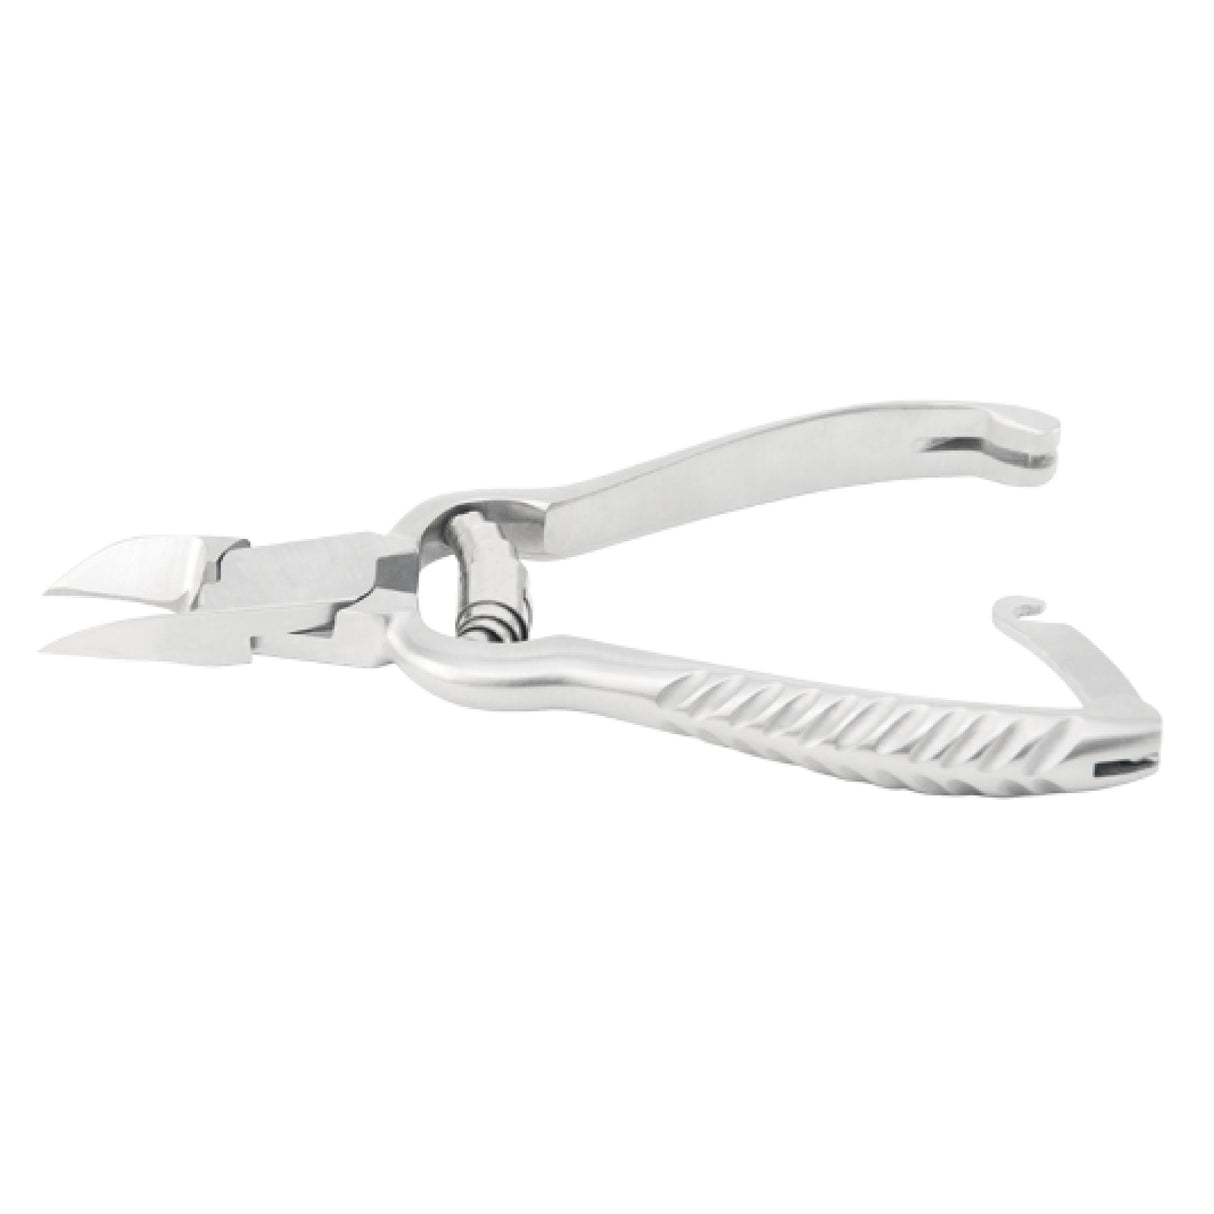 Pliers for nail shortening | 14cm/18mm